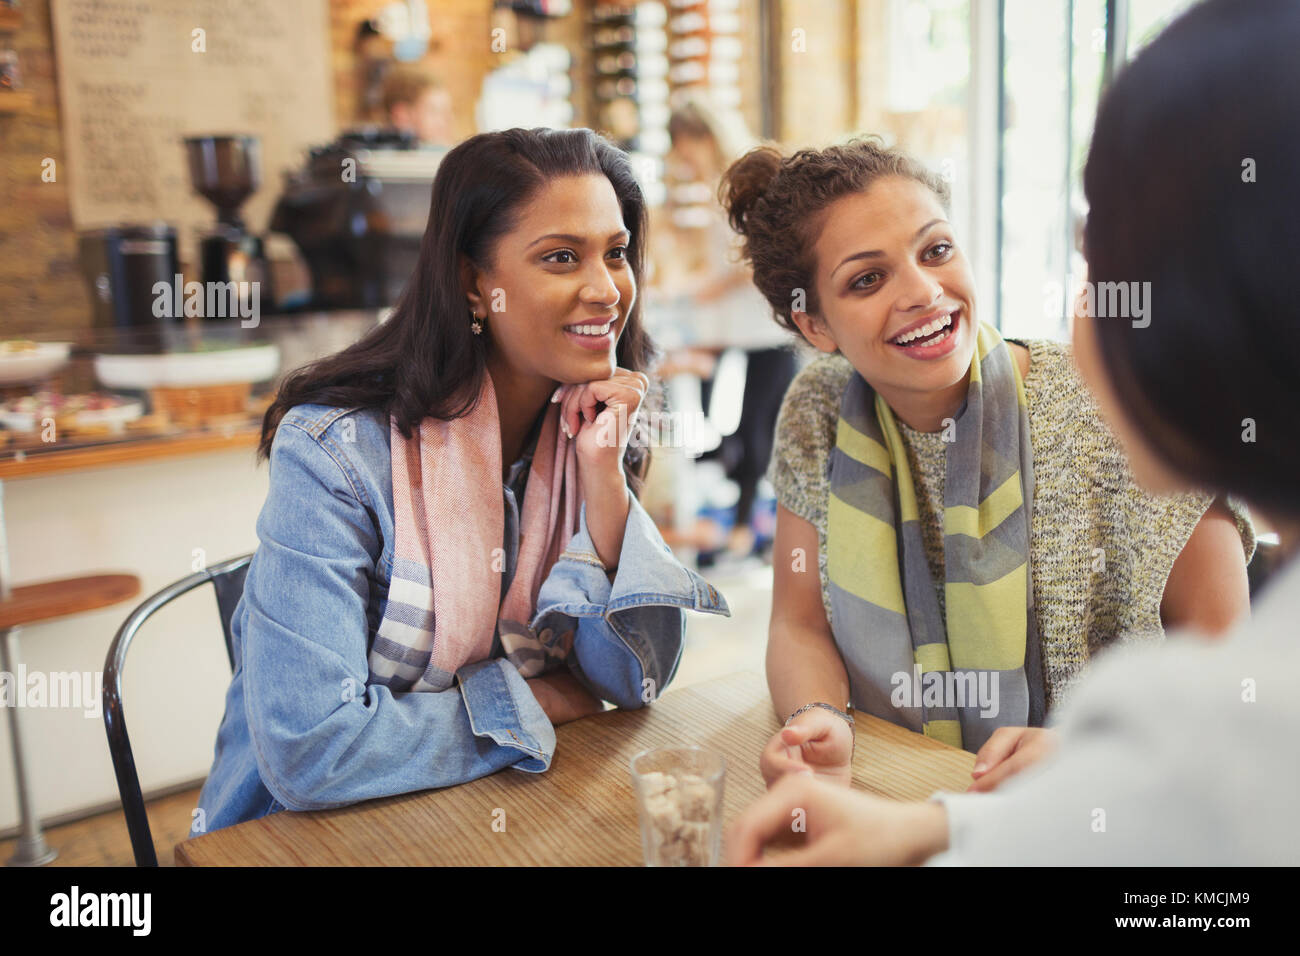 Smiling women friends talking at cafe table Stock Photo